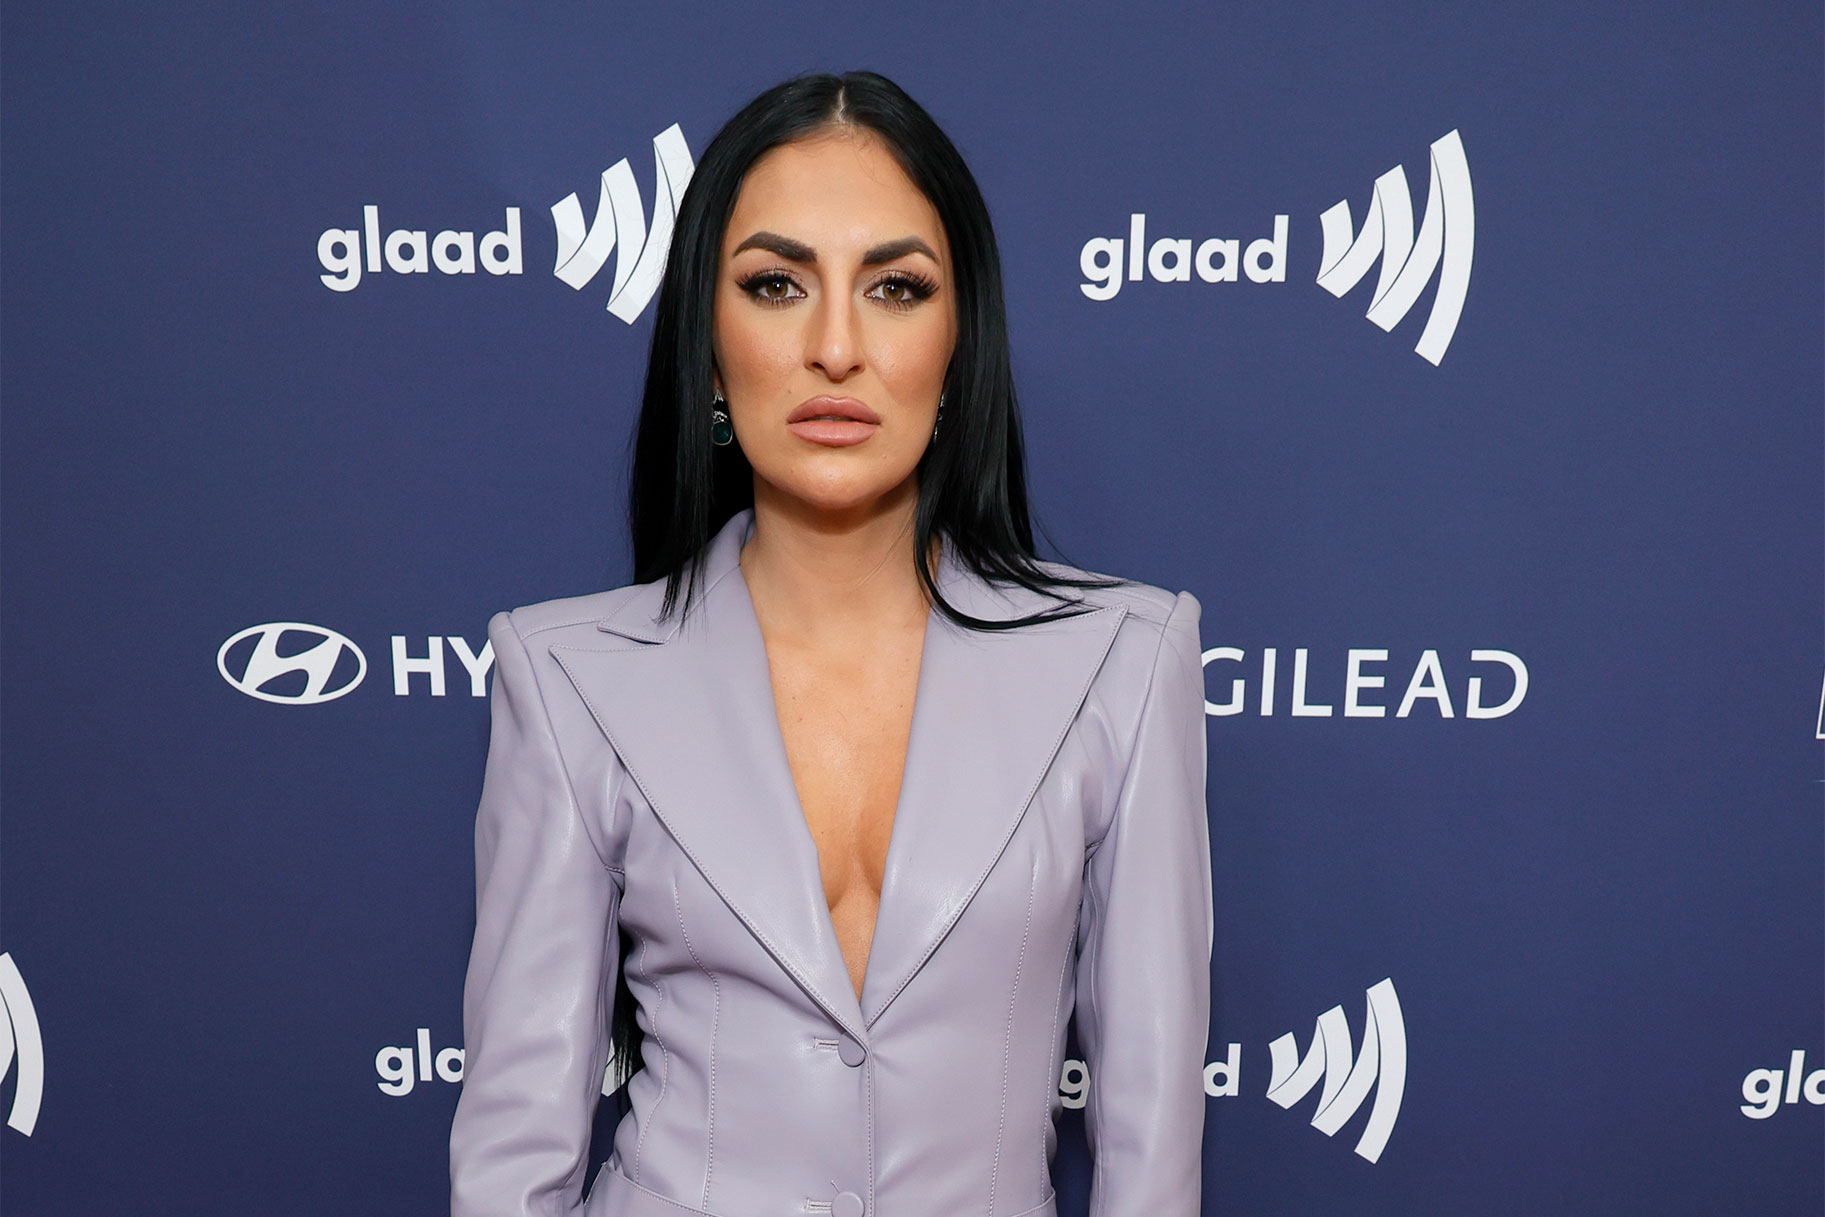 Sonya Deville on the red carpet of the GLAAD Media Awards at The Beverly Hilton on March 30, 2023